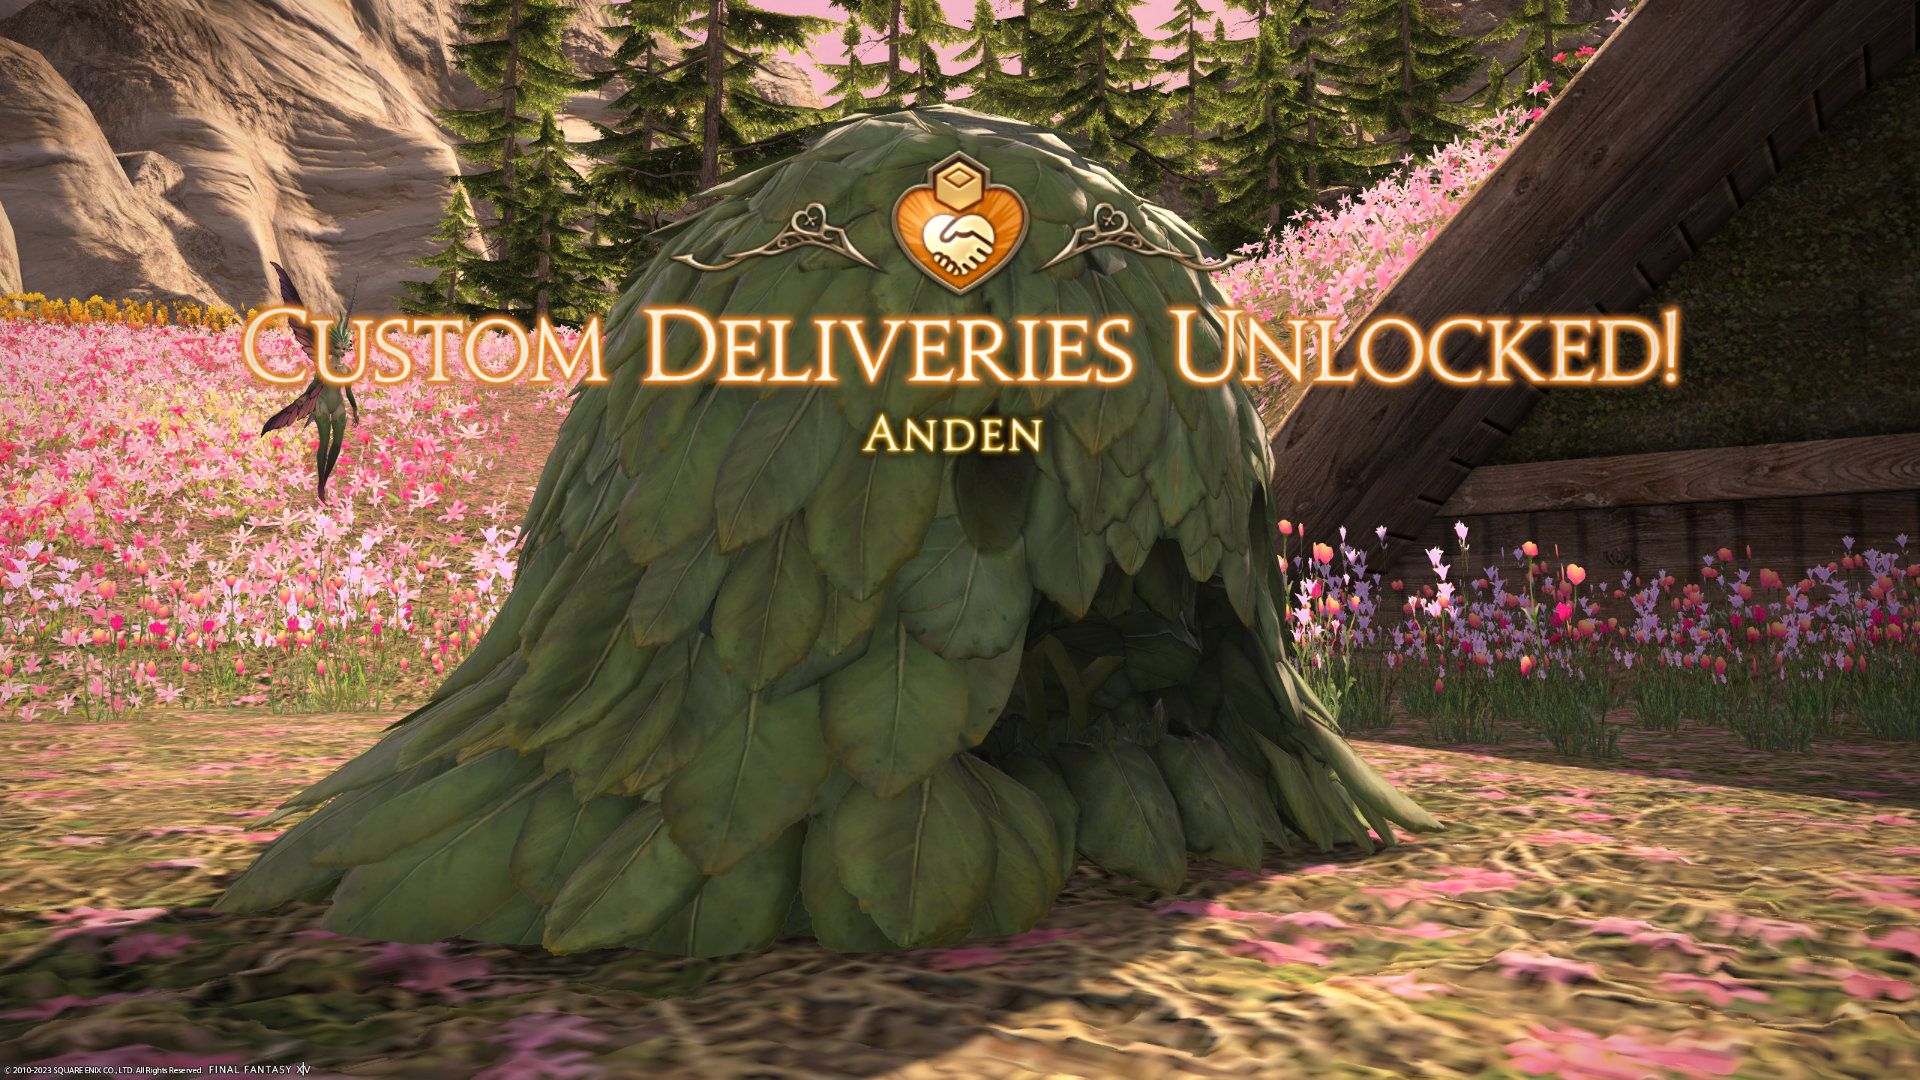 An image of the unlocked Anden III Custom Deliveries in FFXIV.